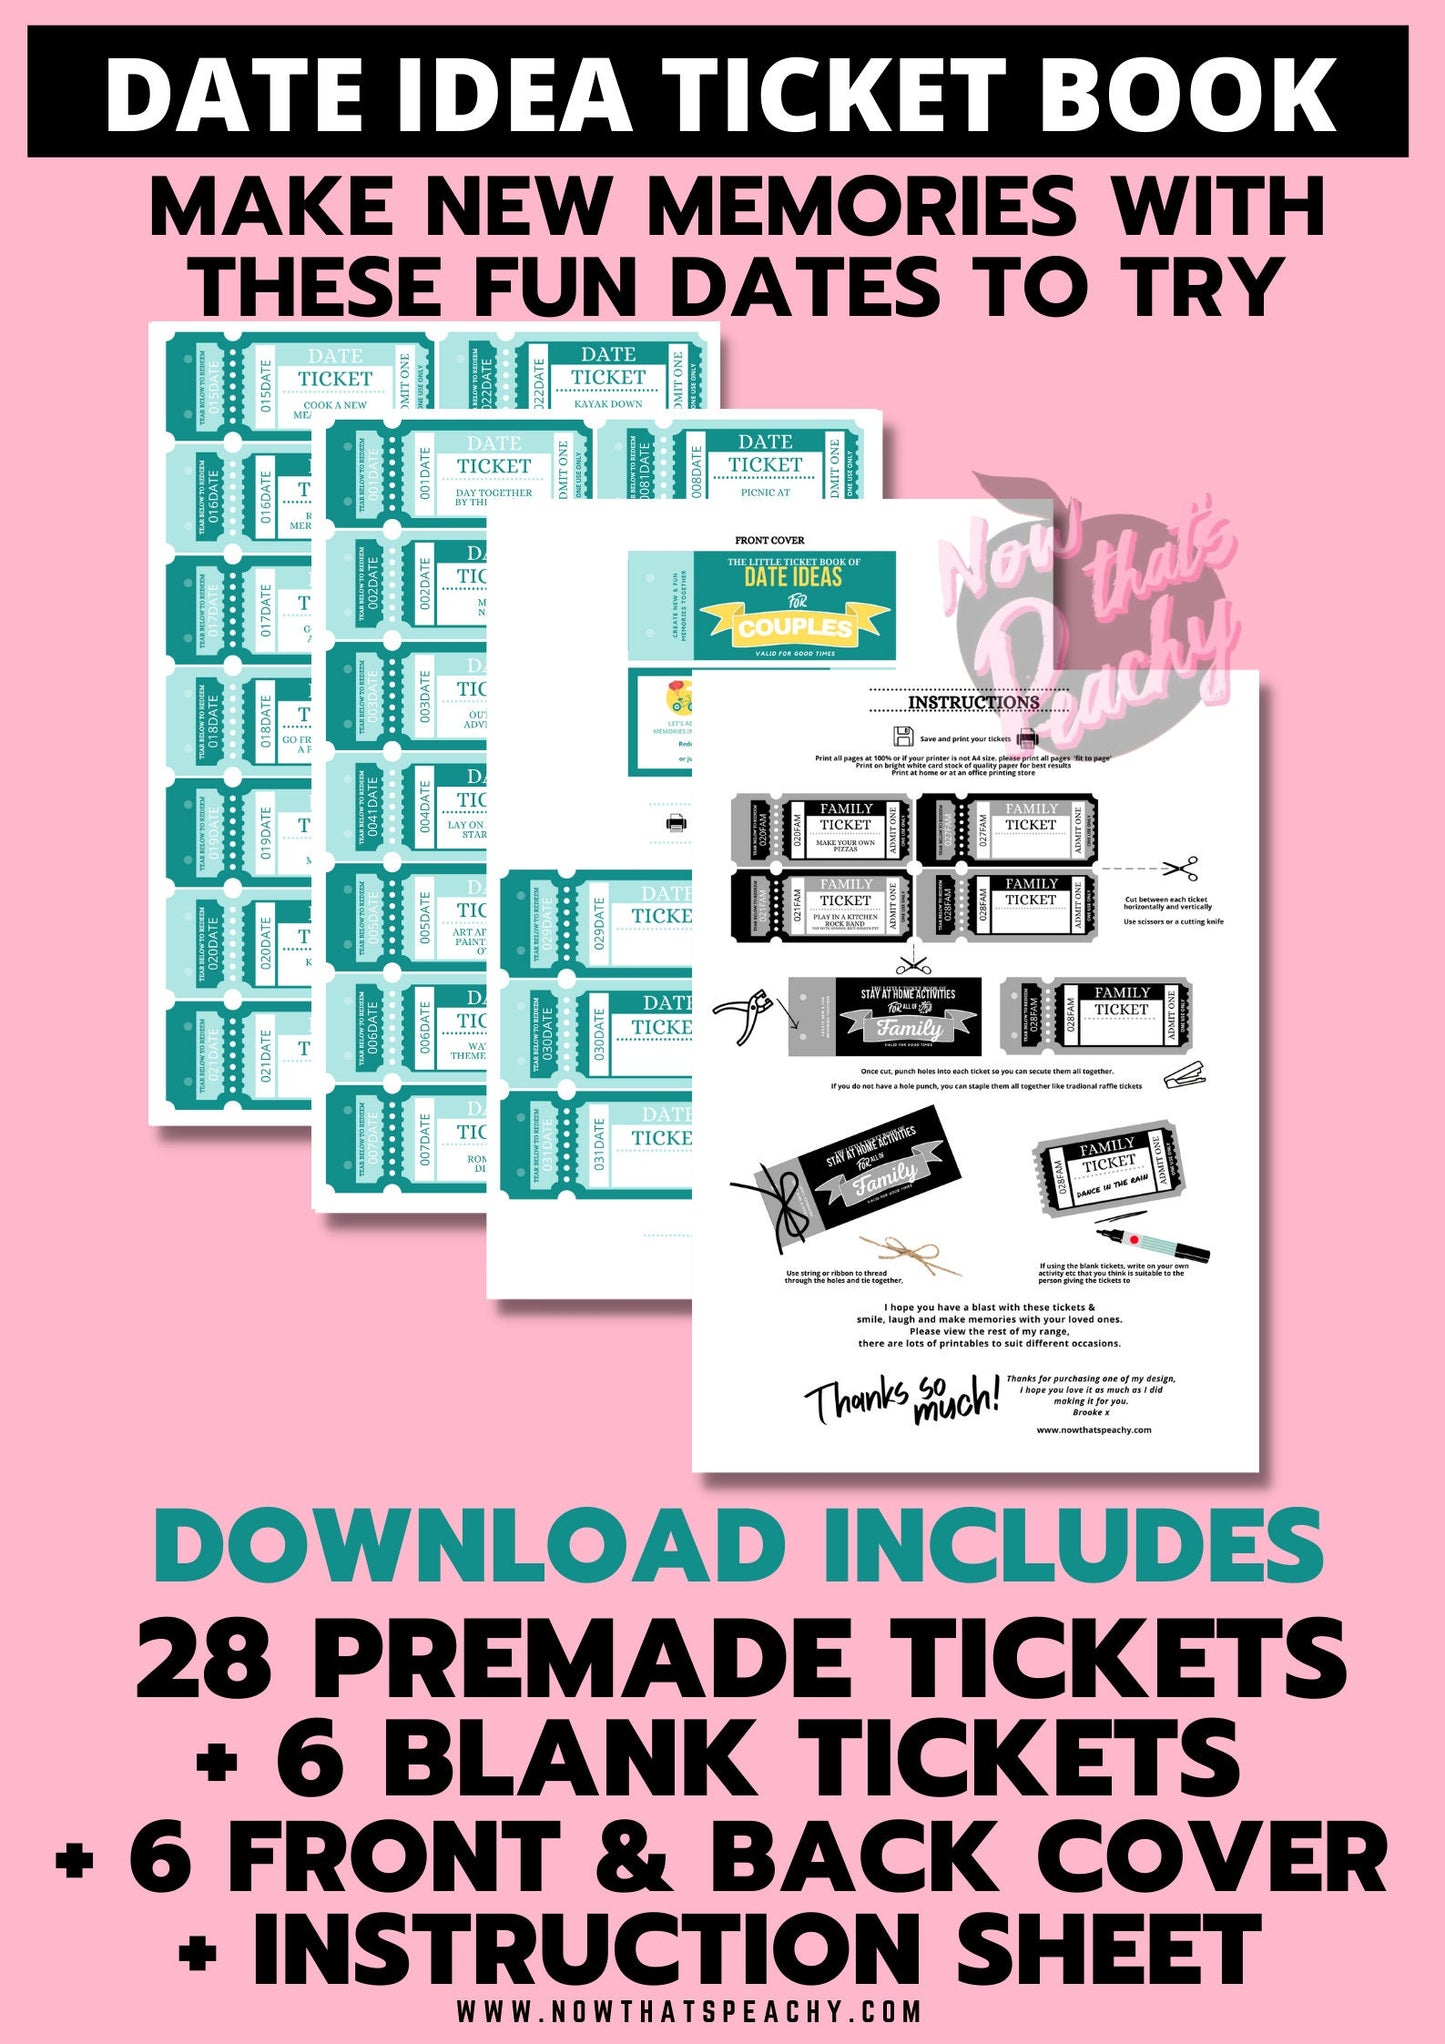 Couples Date ideas Ticket Voucher Coupon book printable diy print off valentines anniversary wife husband digital download fun cute idea present  